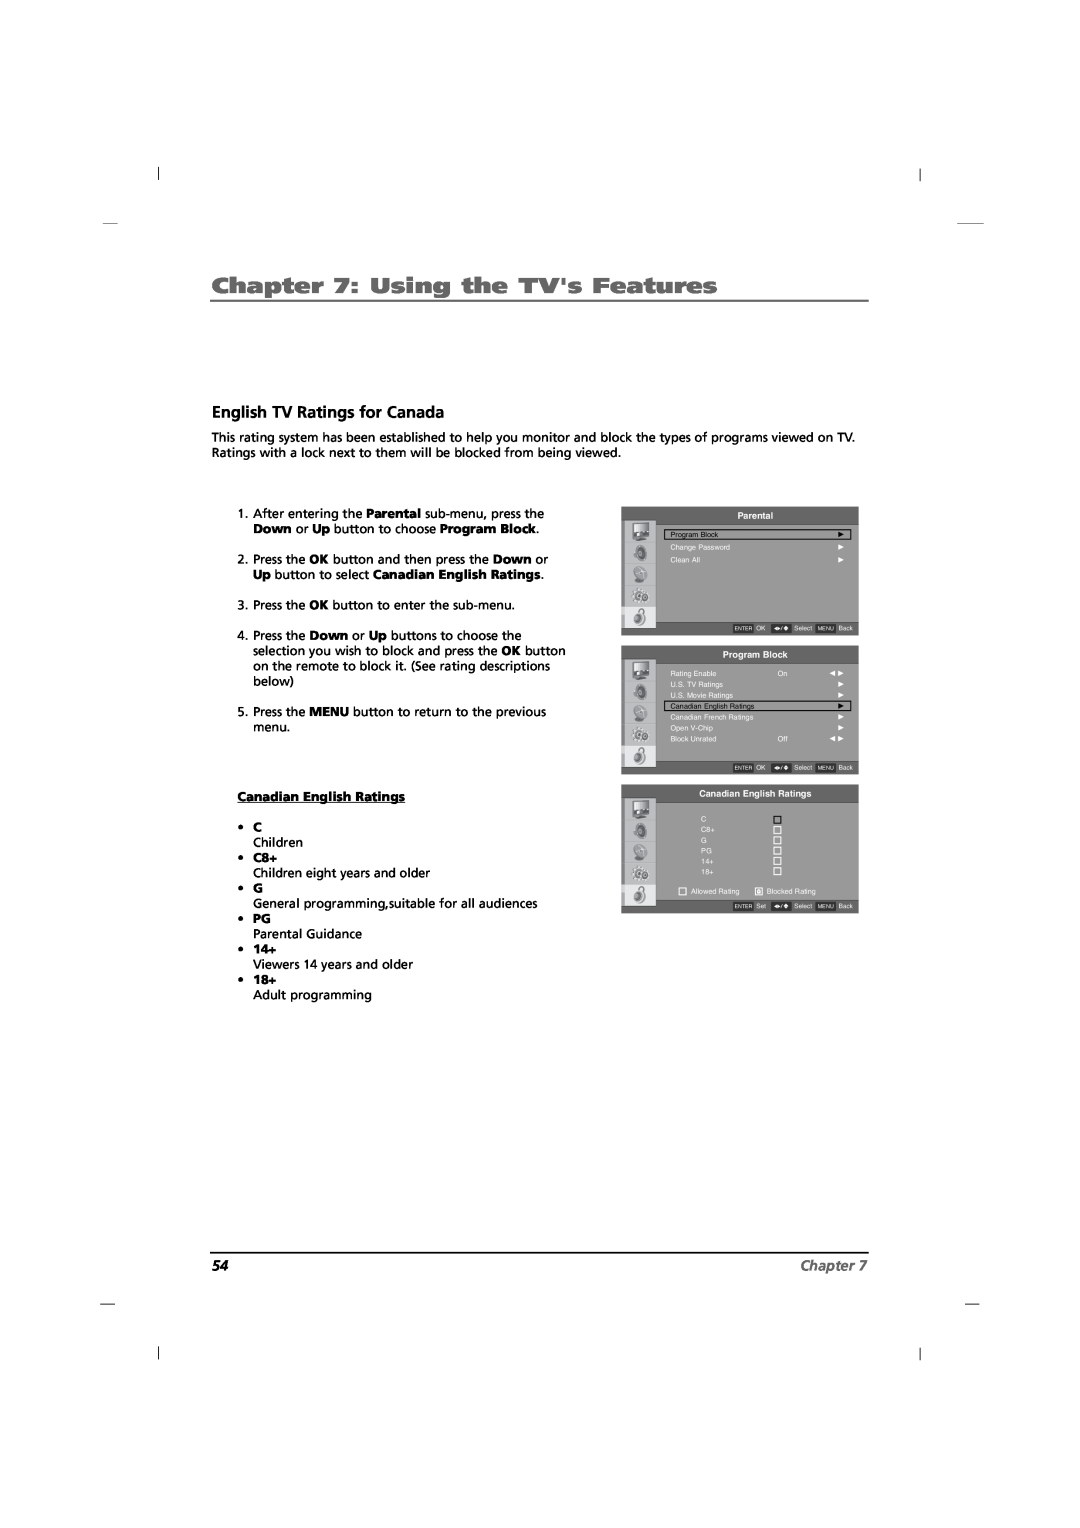 RCA J12H770 manual English TV Ratings for Canada, Using the TVs Features, Chapter 